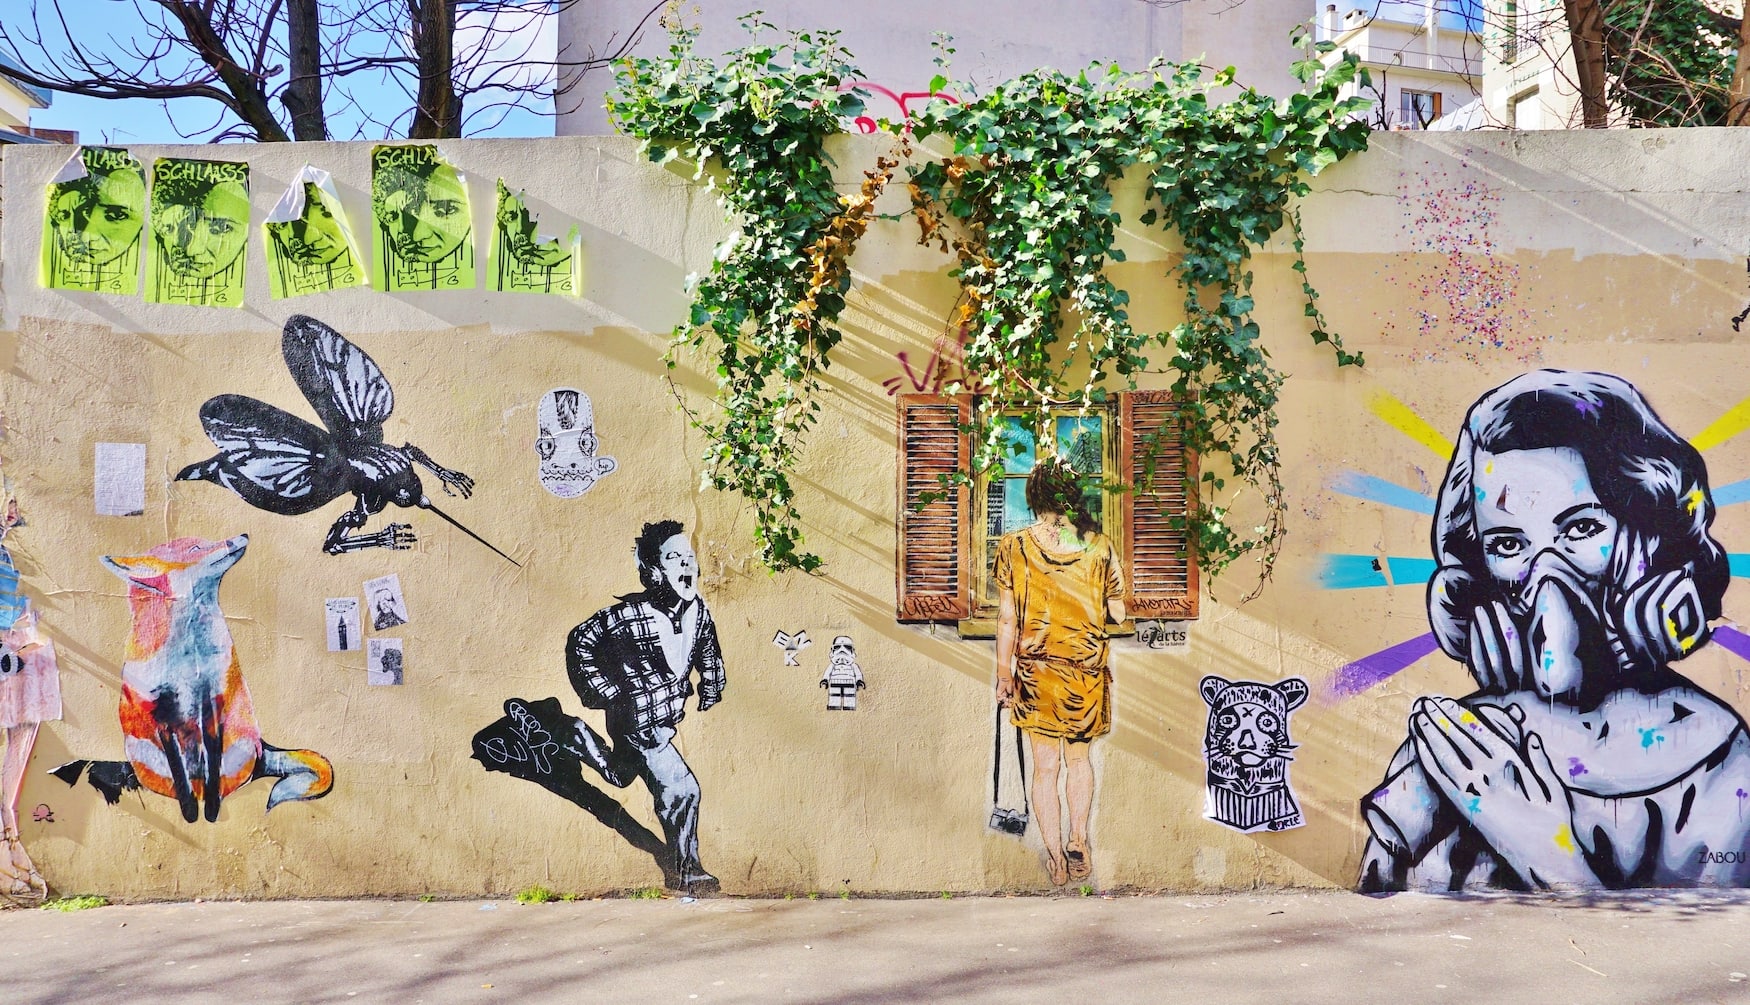 Street art in the streets of Paris, one of the best street art cities in the world